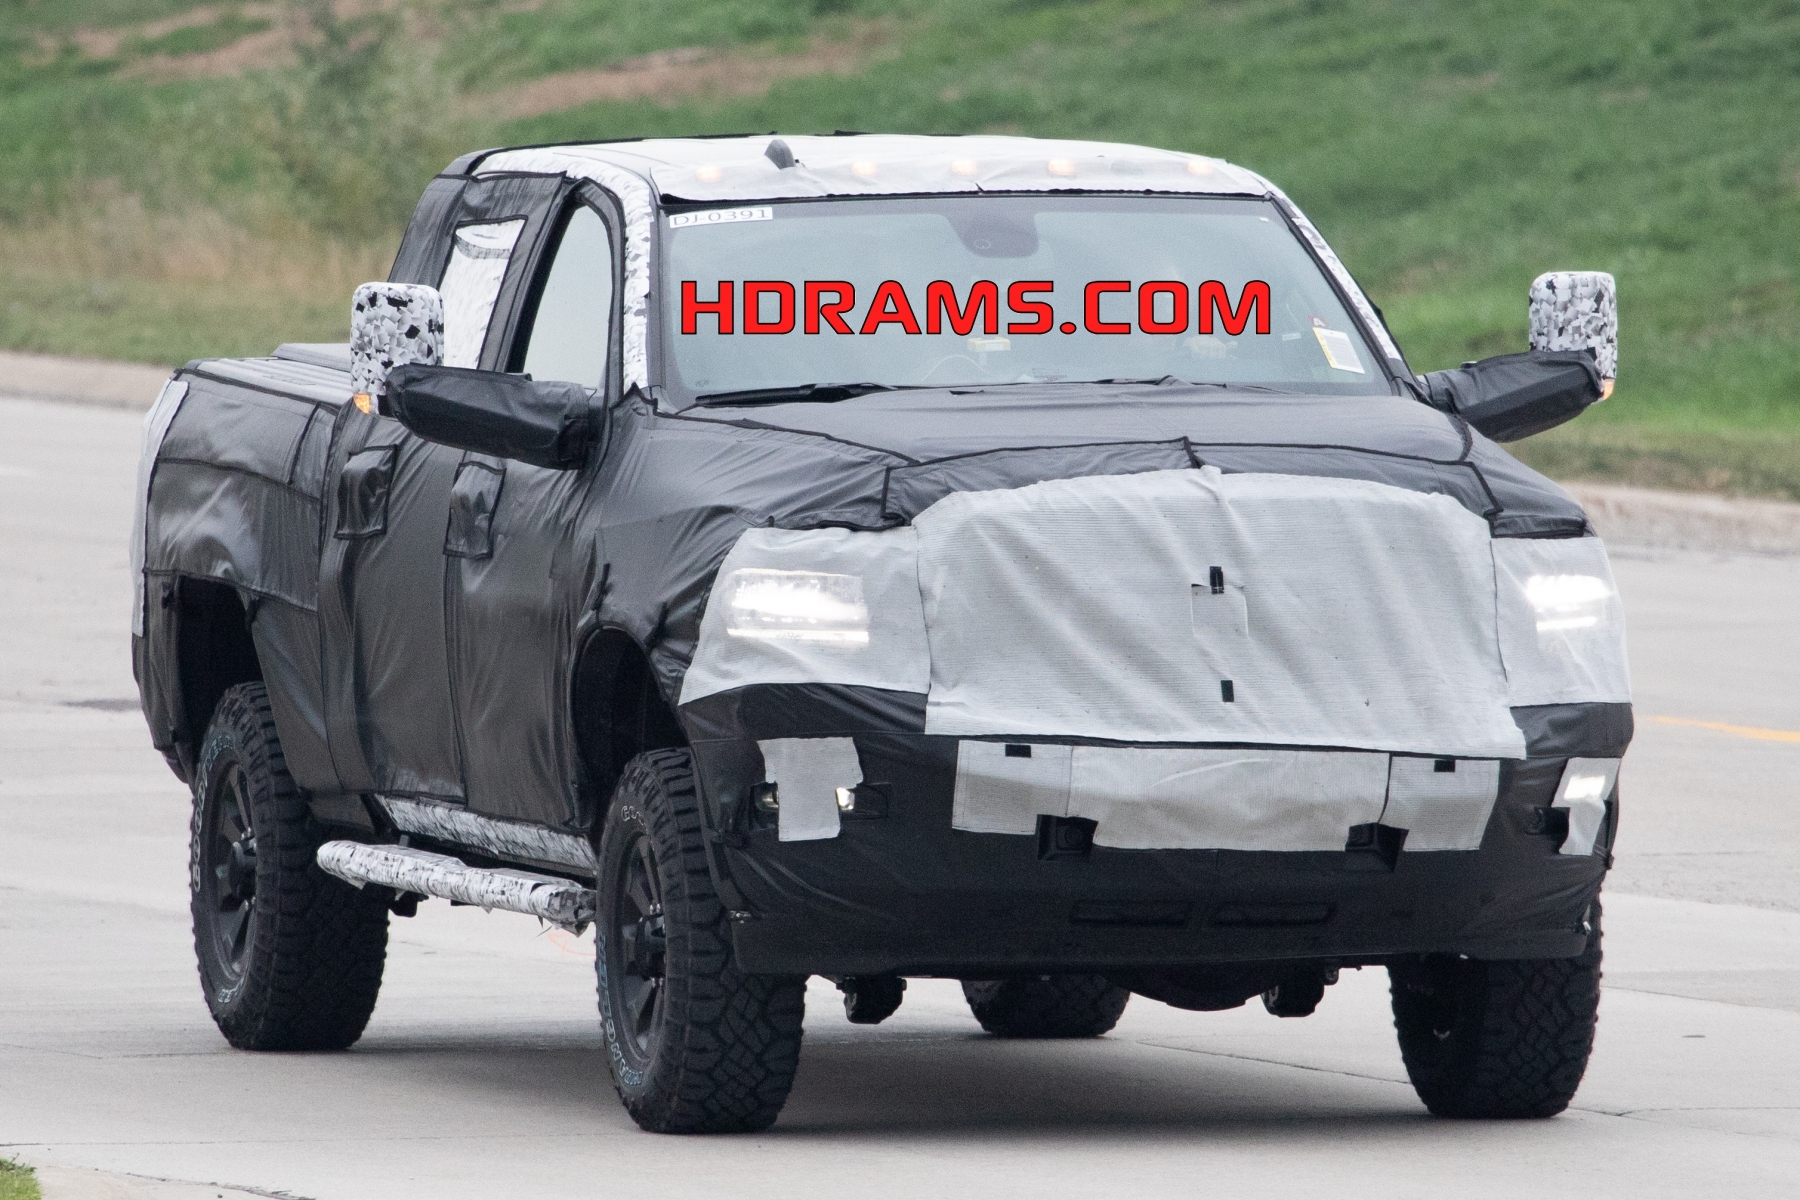 2019 Ram 2500 Power Wagon Prototype. (Real Fast Fotography).